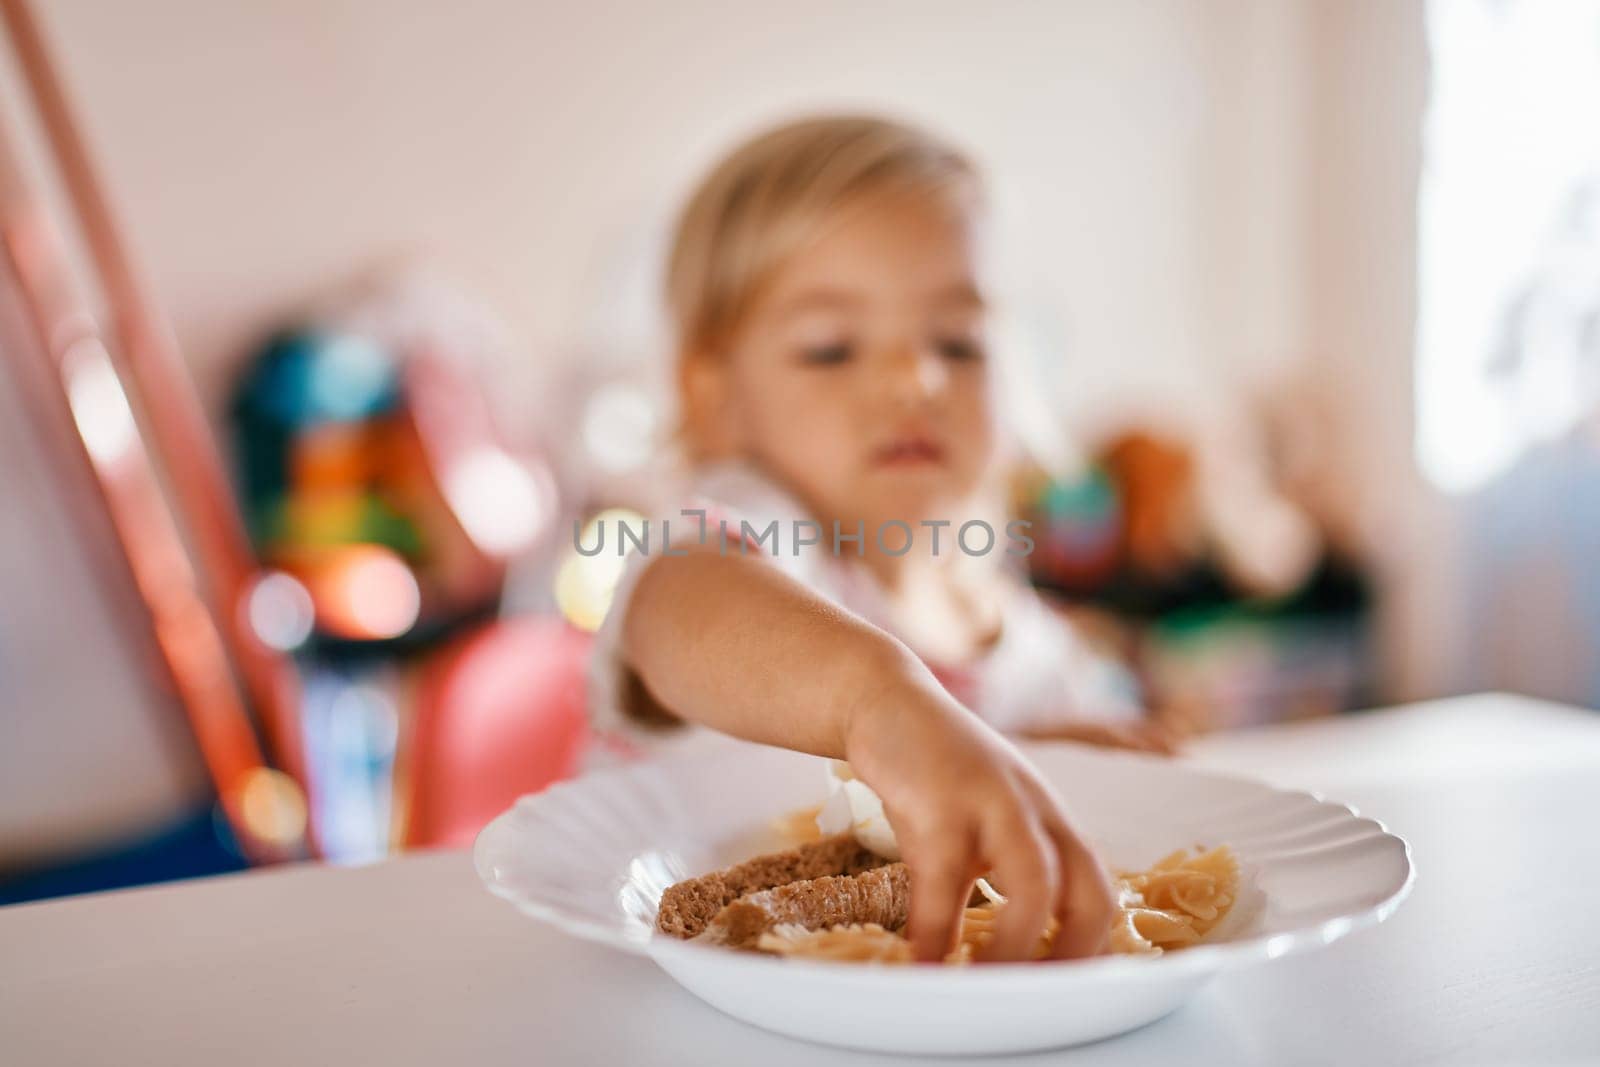 Little girl sits at the table and takes out pasta from a plate with her hands by Nadtochiy